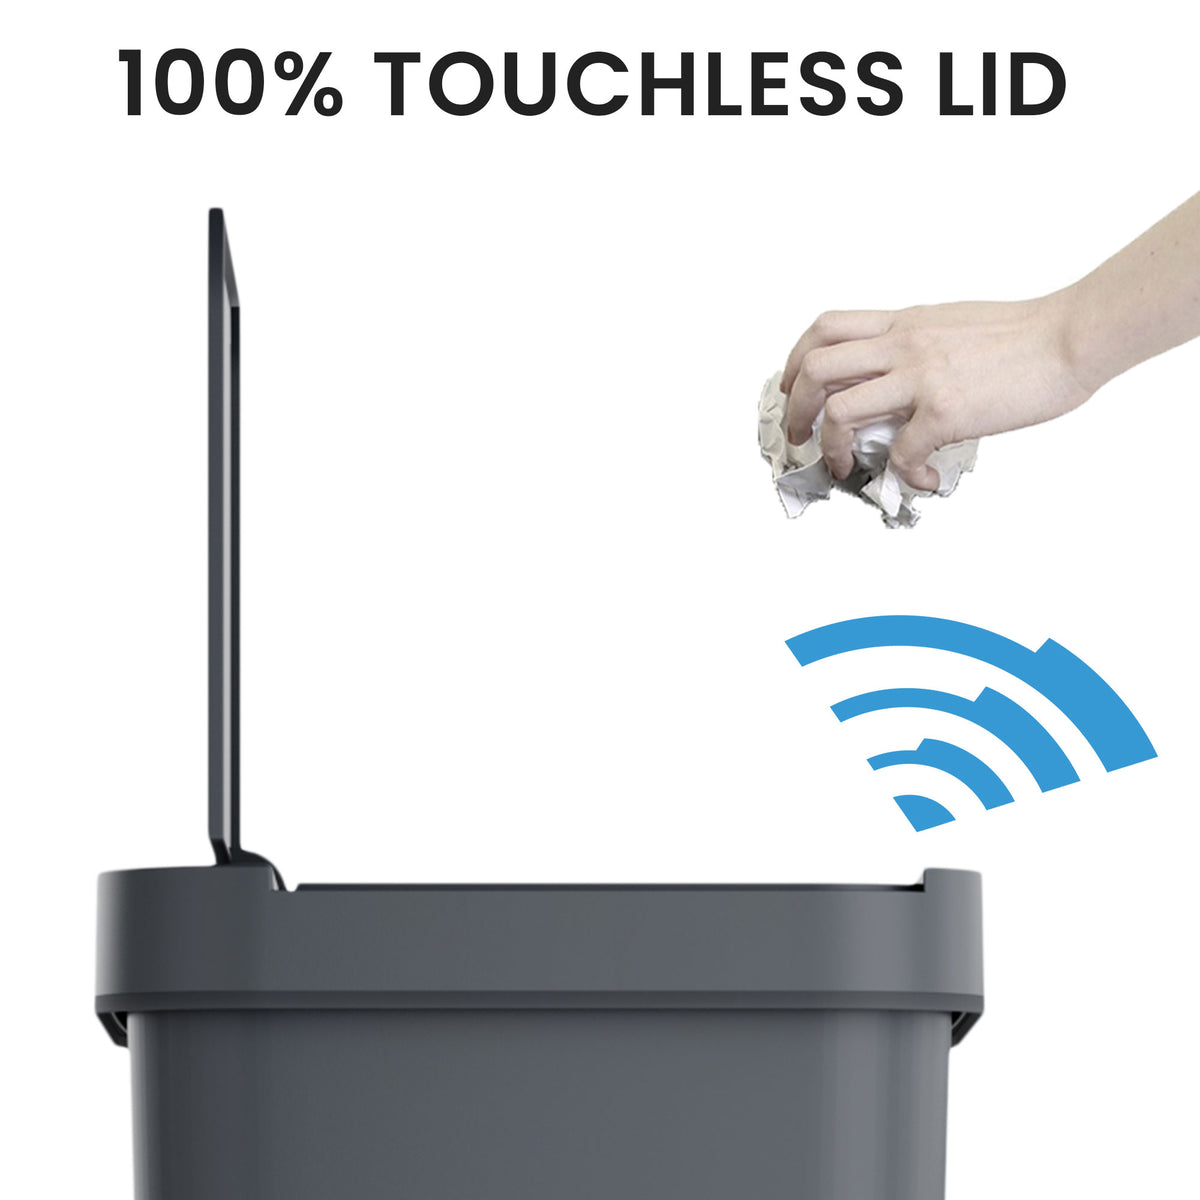 100% Touchless Lid